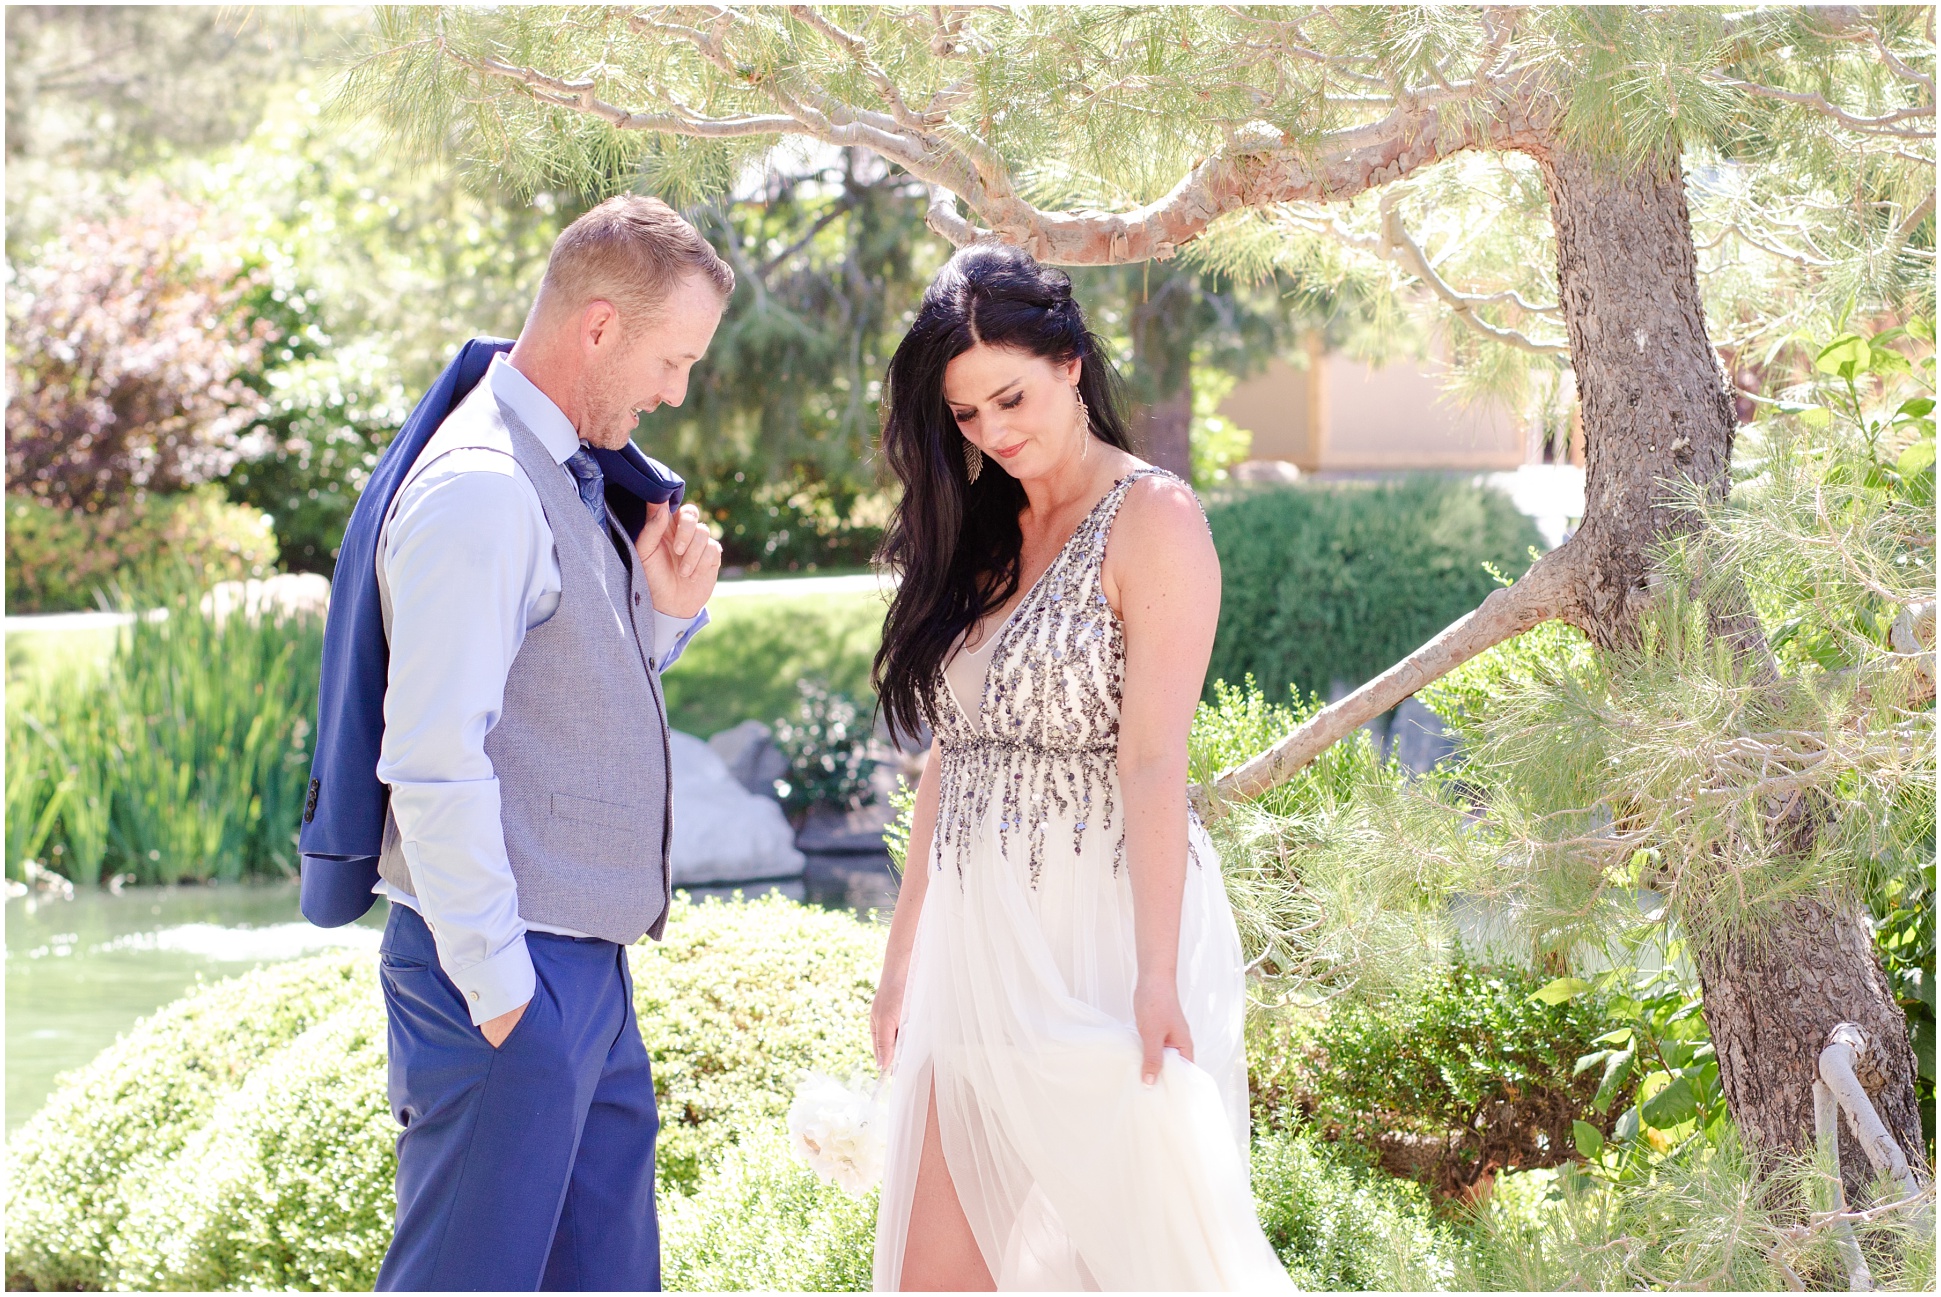 Groom wearing gray vest and blue suite. Bride wearing sequenced white chiffon dress with a slit